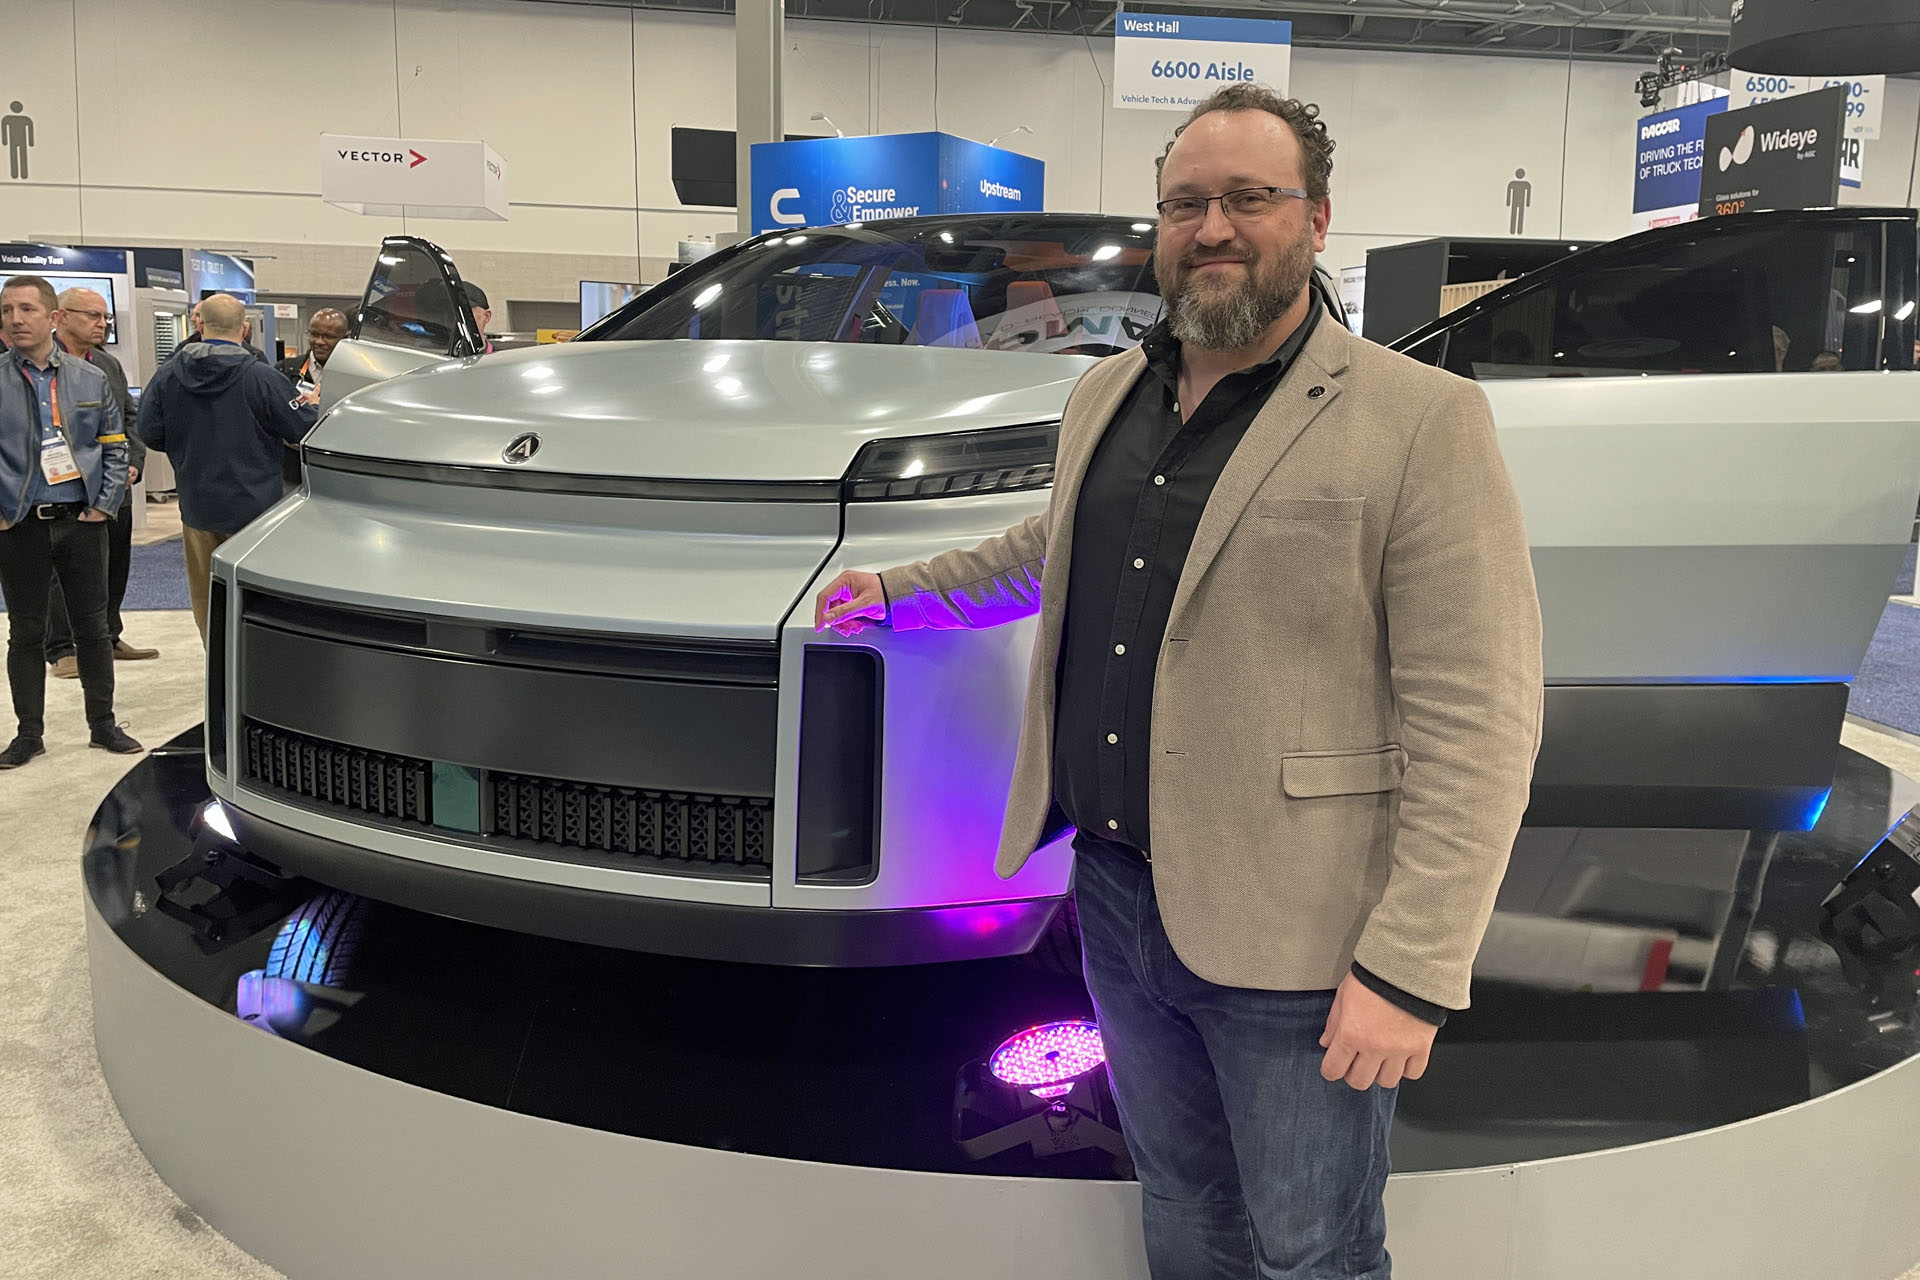 Vlavio Volpe, president of the Automotive Parts and Manufacturing Association (APMA), and the Project Arrow all-electric concept / Graeme Fletcher, The Charge